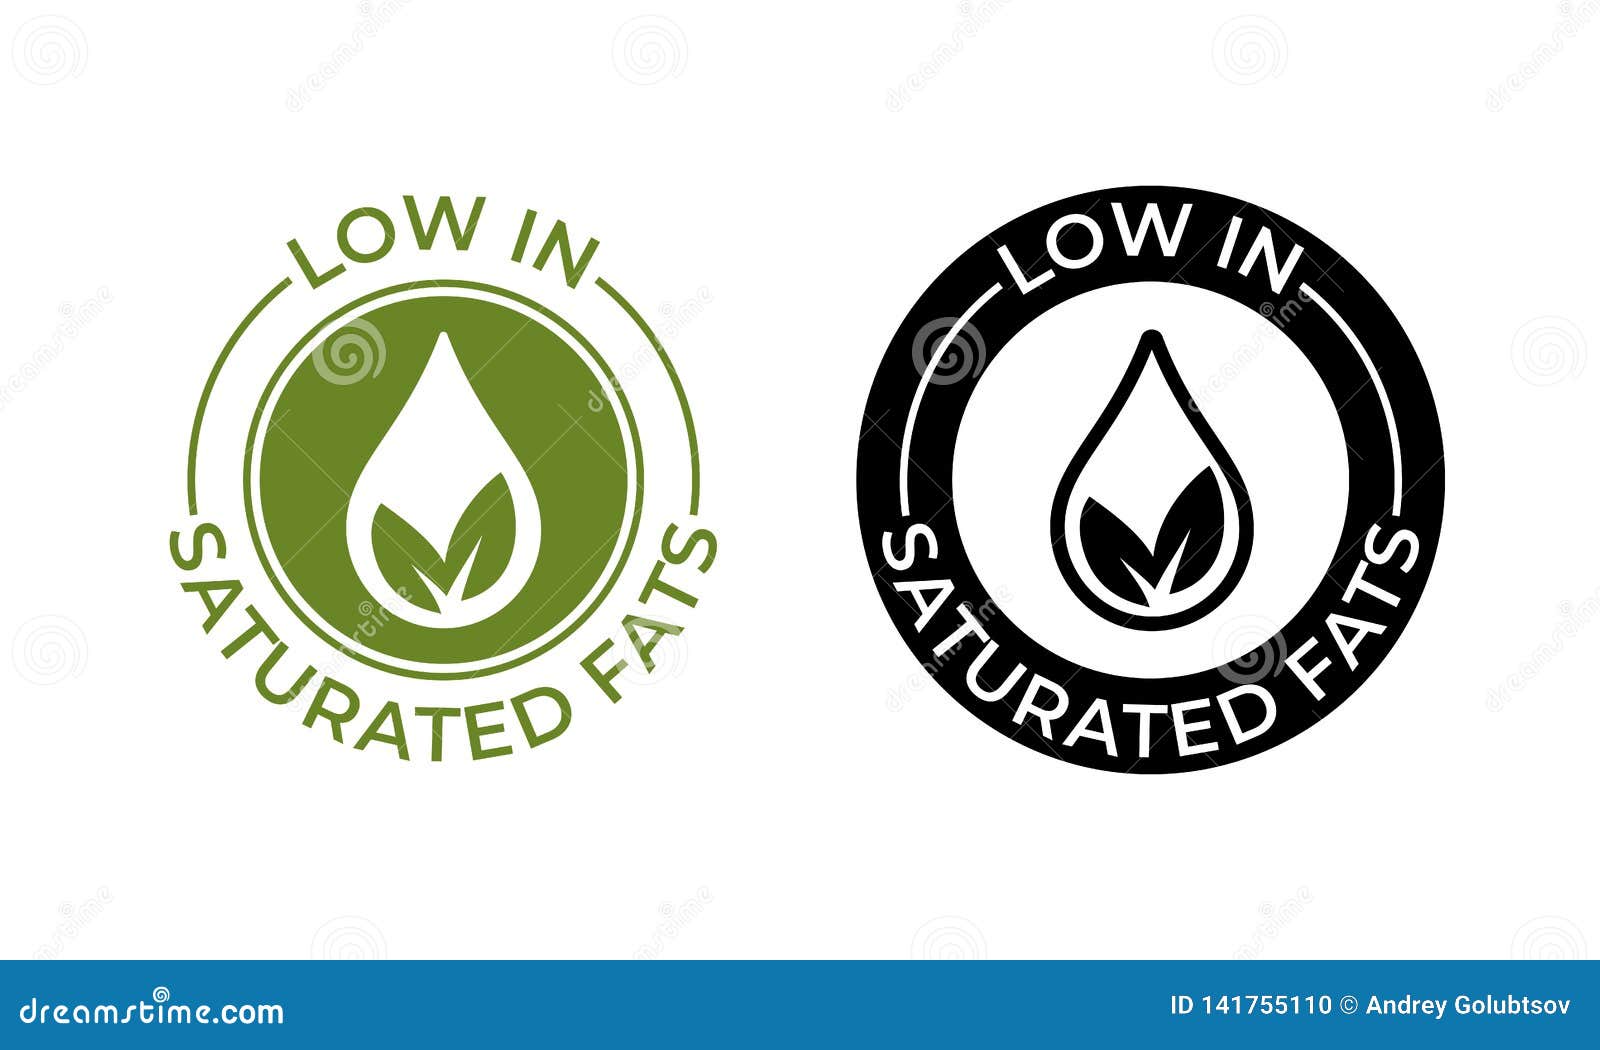 low in saturated fats  icon. food package seal, free or contain no saturated fats, leaf and oil drop